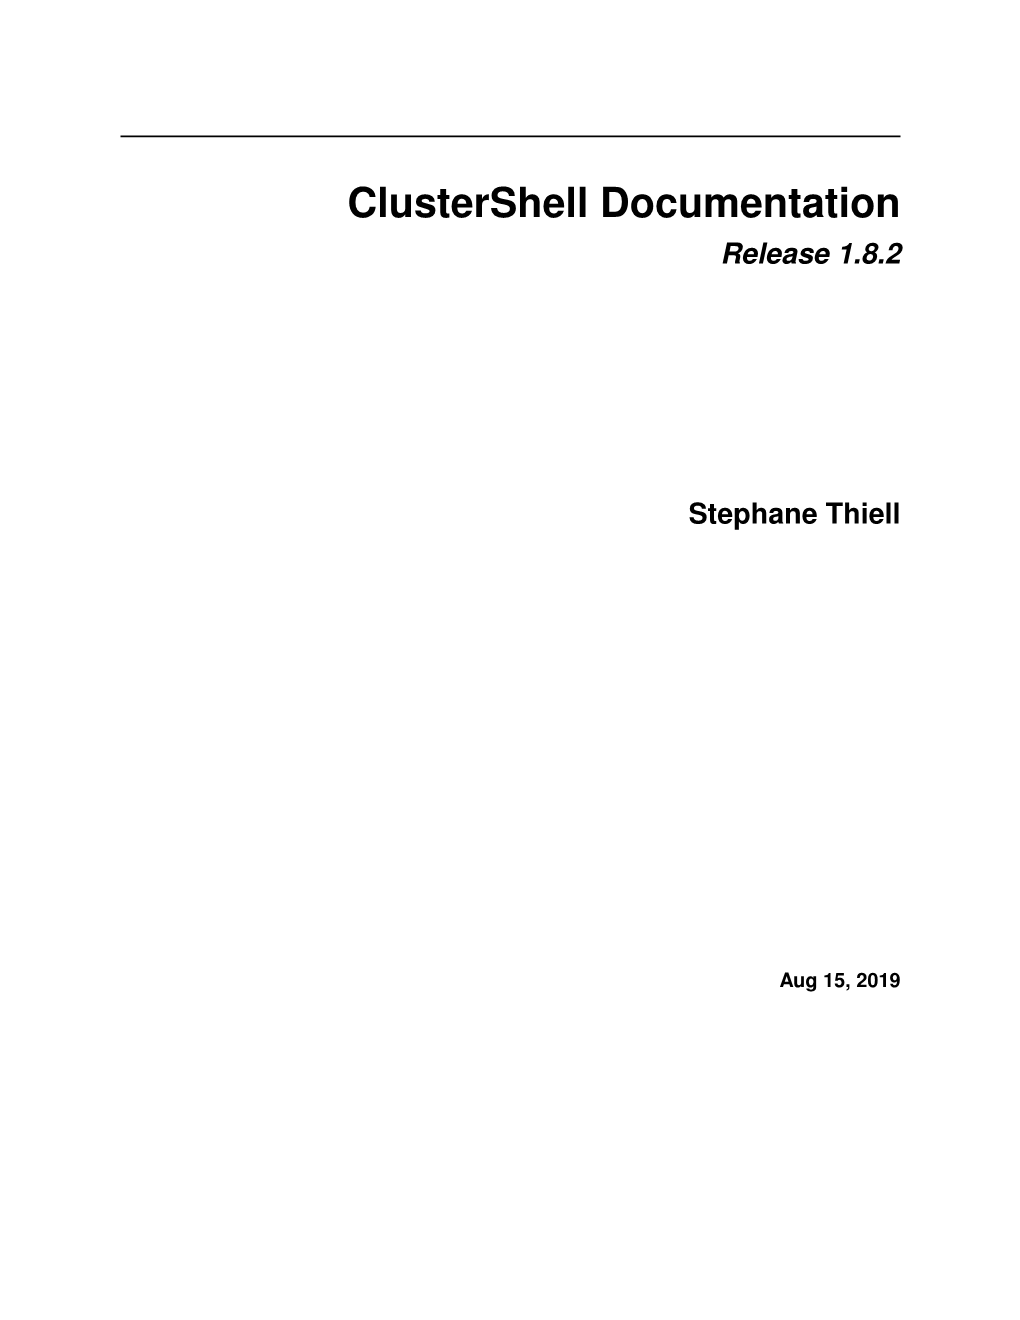 Clustershell Documentation Release 1.8.2